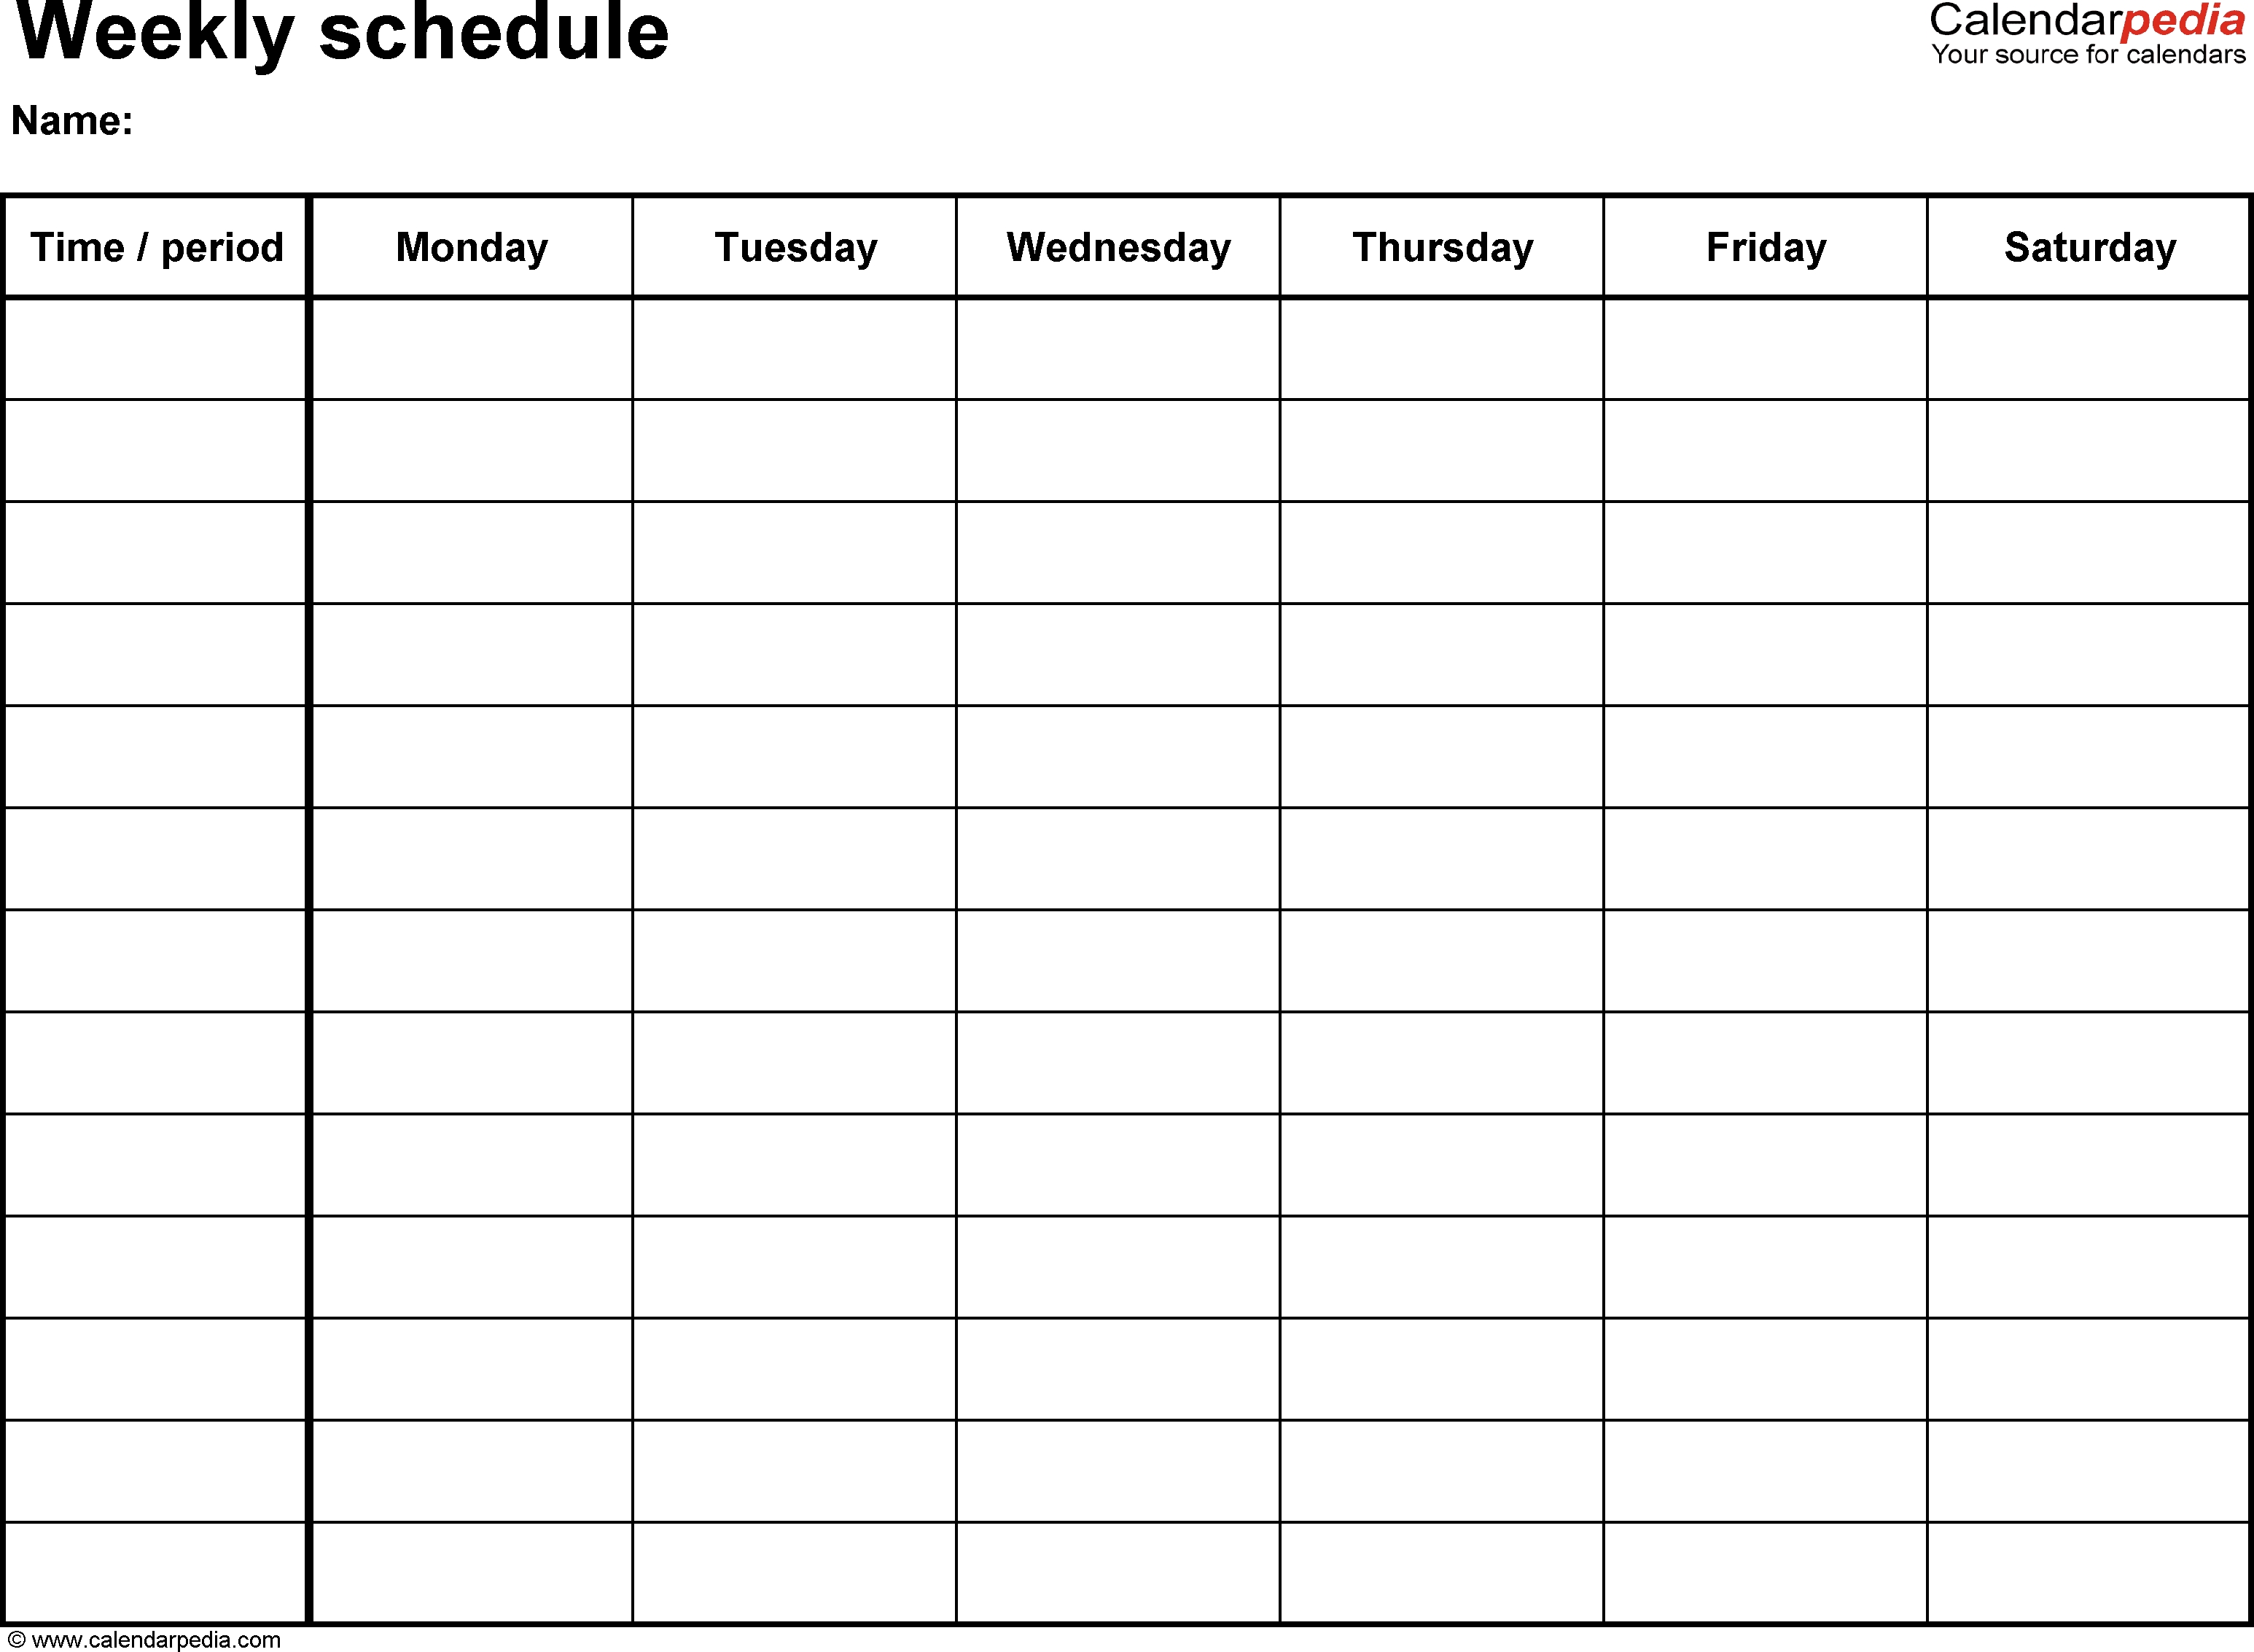 Free Weekly Schedule Templates For Pdf - 18 Templates Calendar Template Date And Time